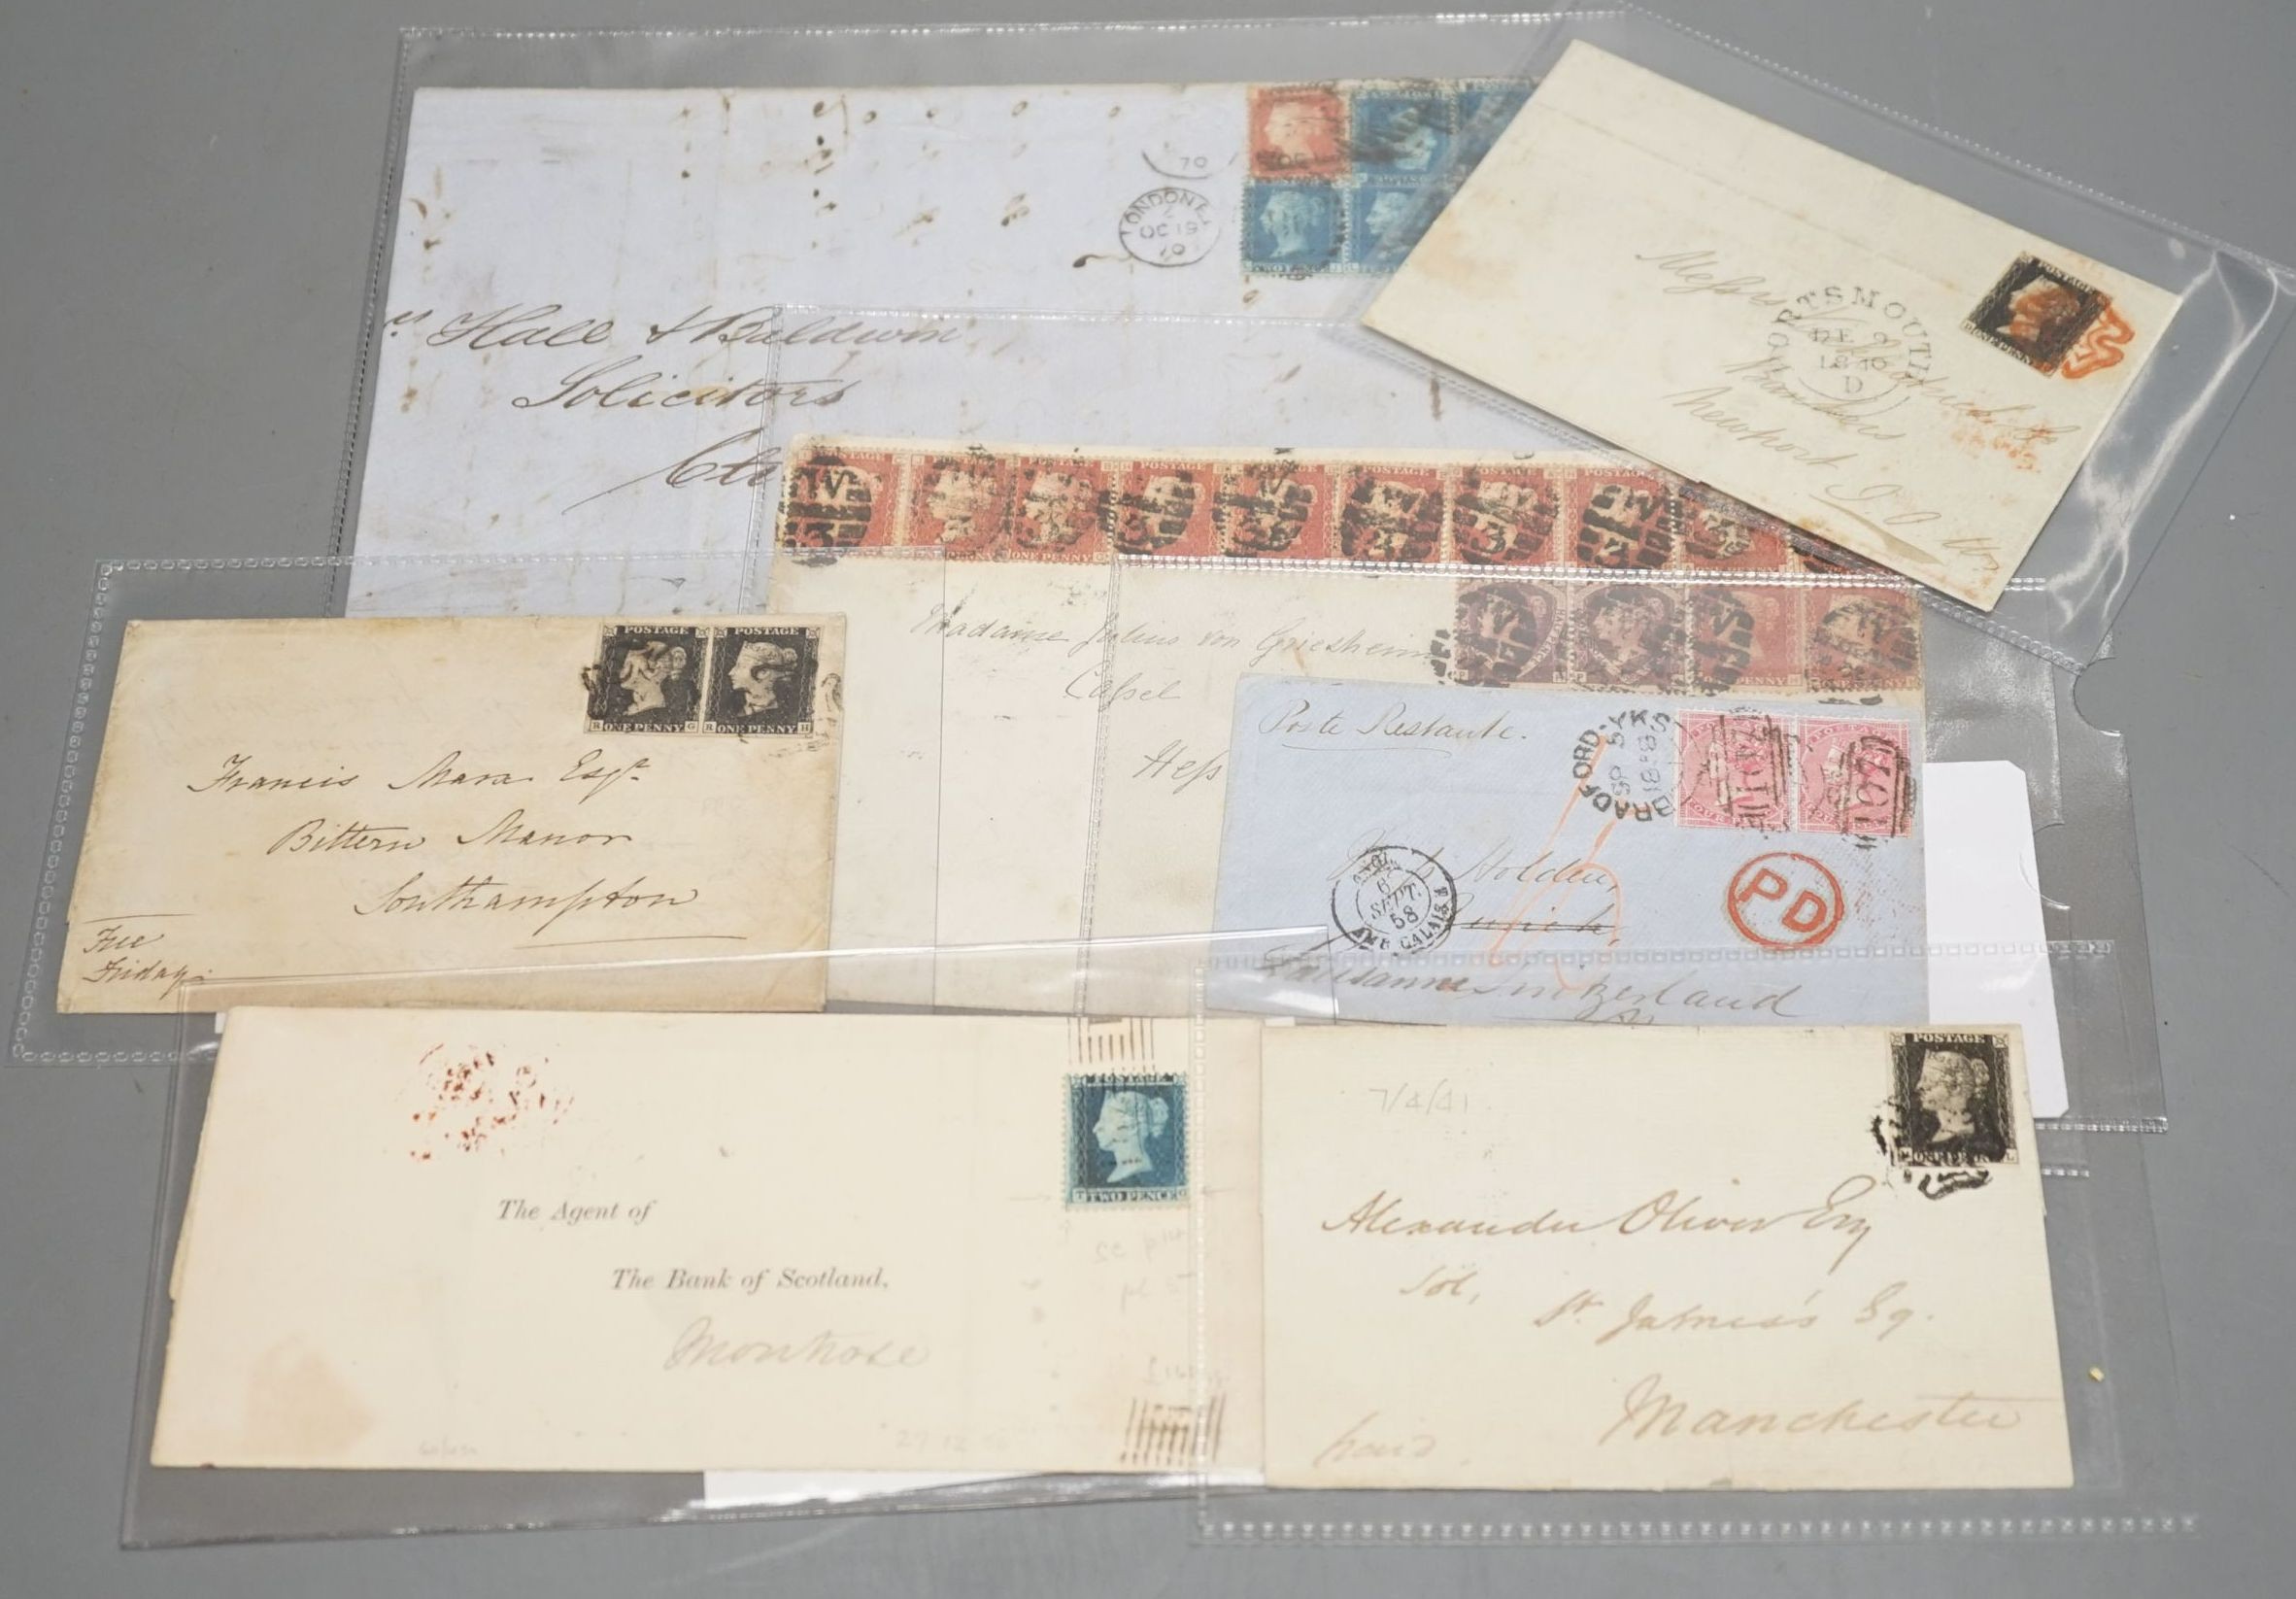 Great Britain group of seven covers with Dec. 1840 1d black plate 4, Feb. 1841 1d black, pair plate 8 to Southampton, Apr. 1841 1d black plate 7, 1856 2d blue. Two large covers with 1d reds and 1858 2d blue. 1858 pair 4d